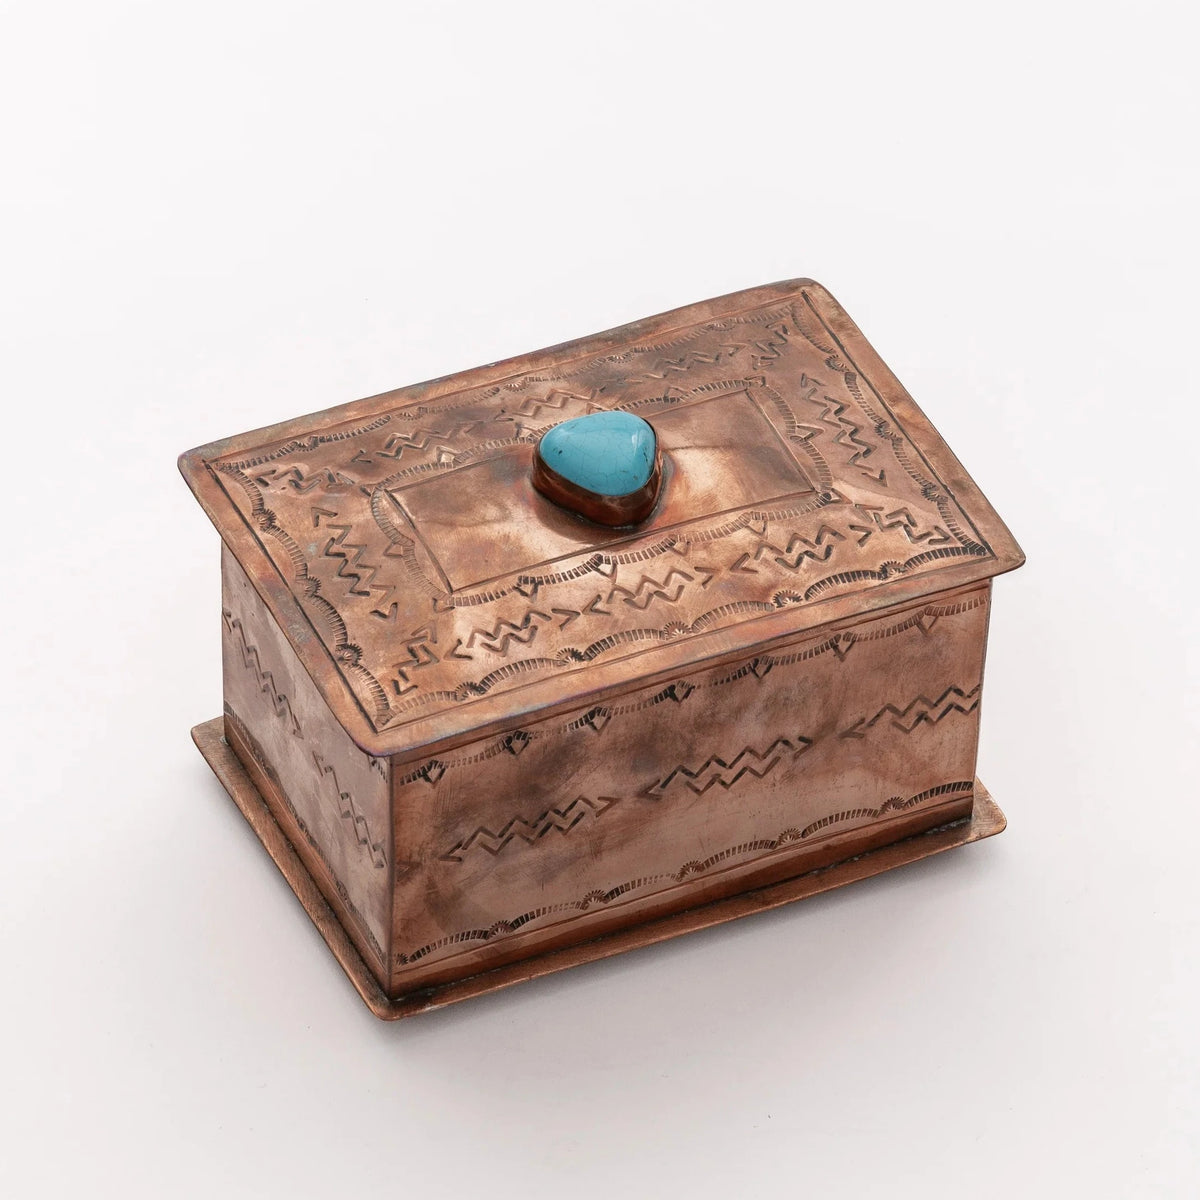 Medium Stamped Copper Box With Turquoise Stone by J. Alexander Rustic Silver